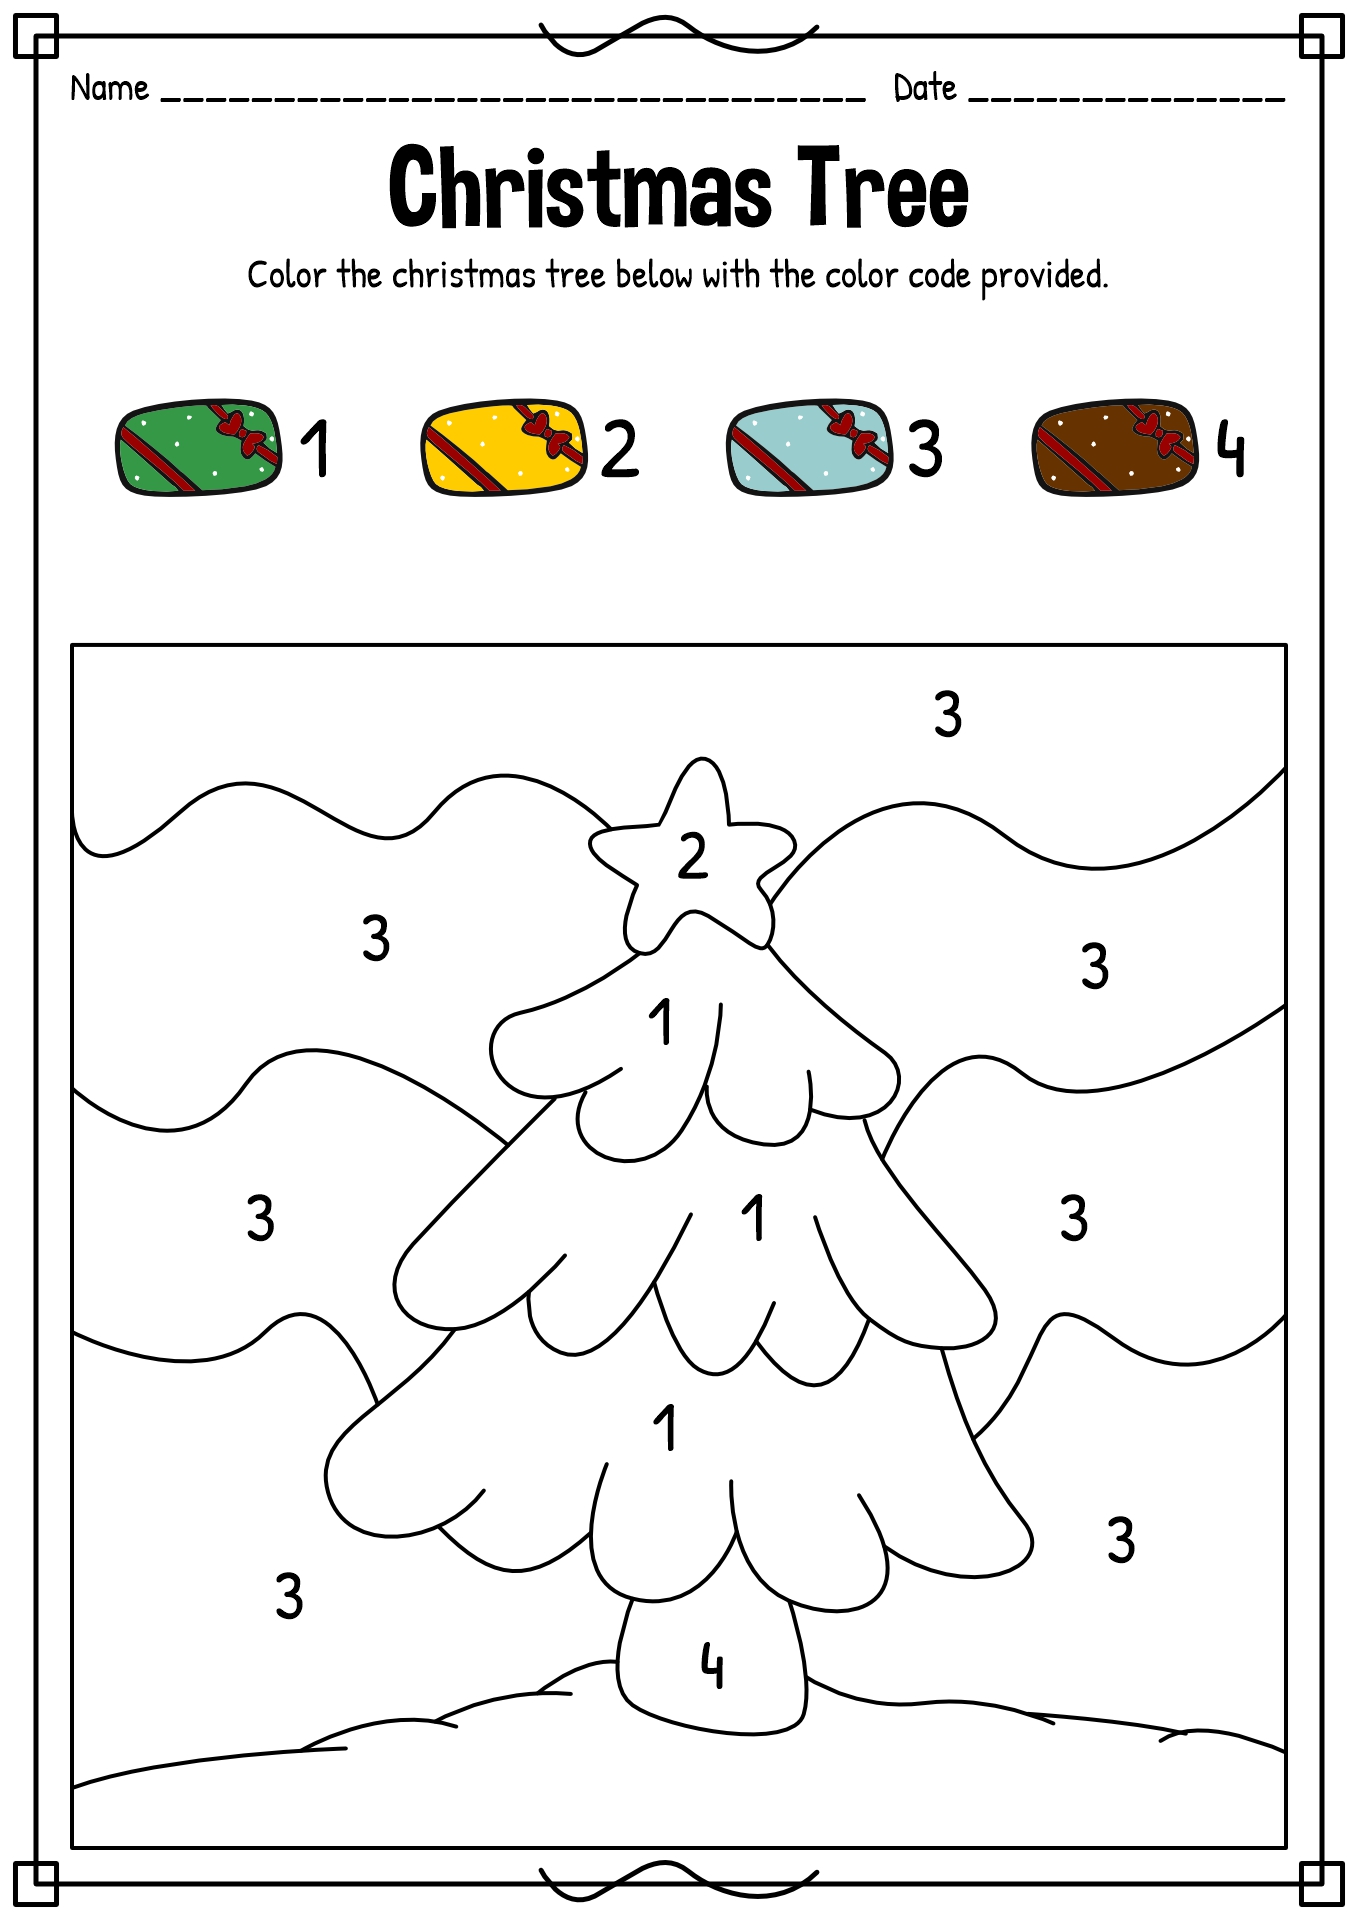 13 Best Images Of Christmas Cutting Worksheets Preschool Cutting Practice Christmas Cut And